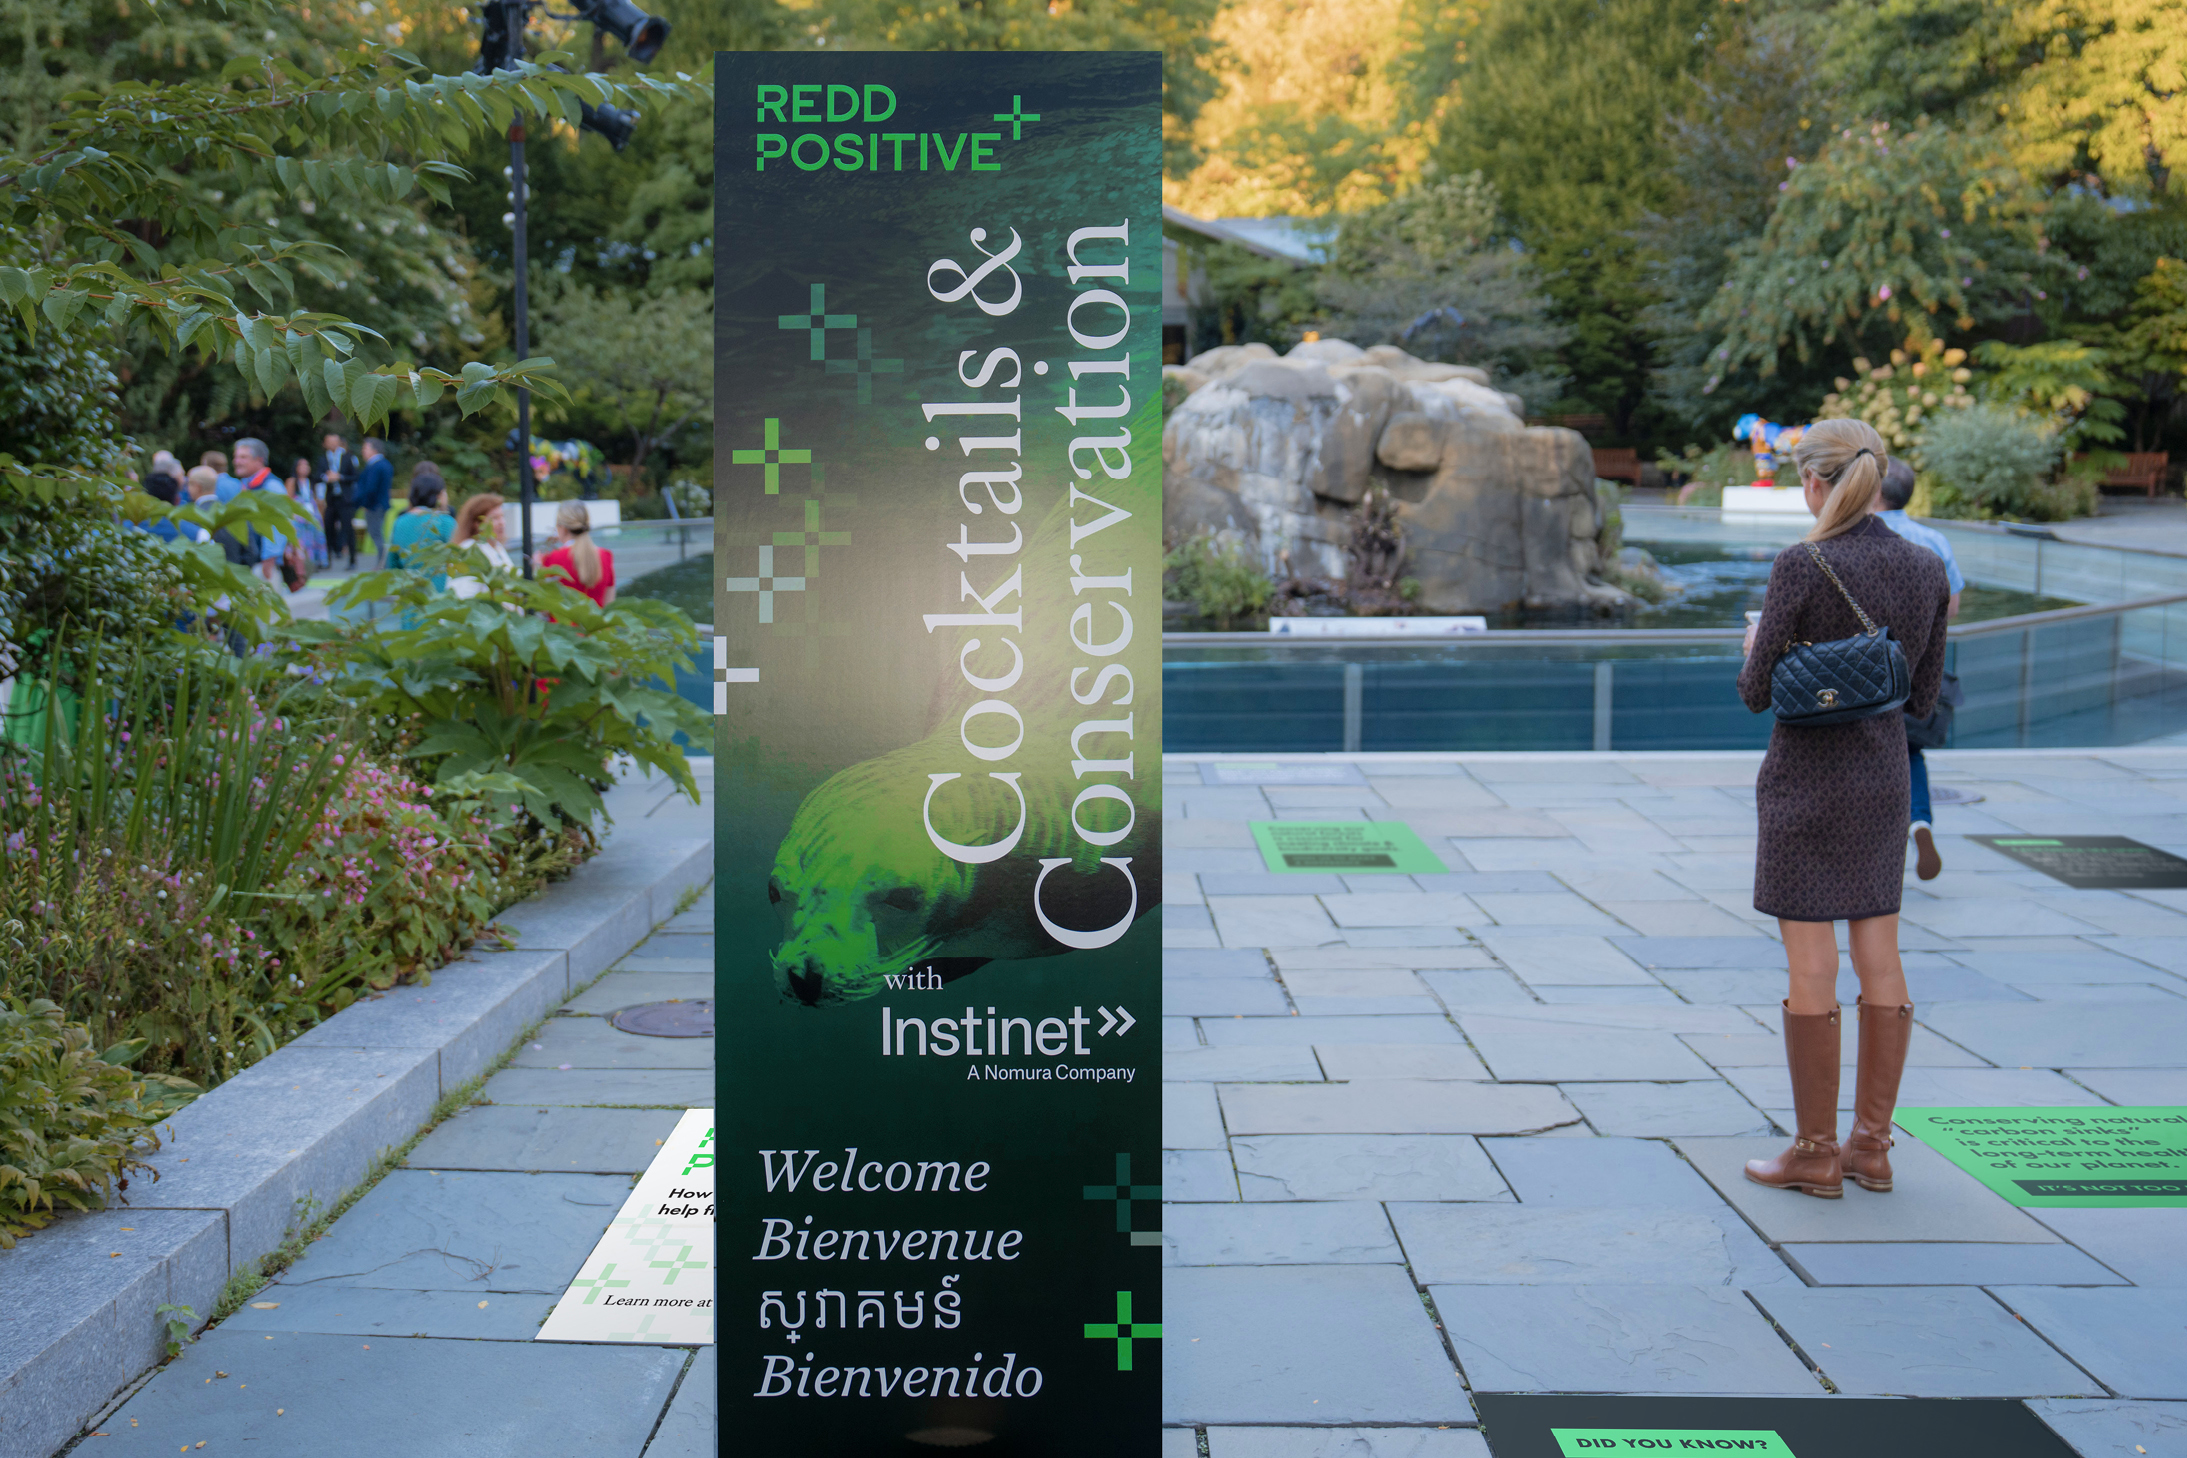 A large vertical sign on a patio at the Central Park zoo greets guests in several languages for the REDD Positive Cocktails and Conservation launch event.